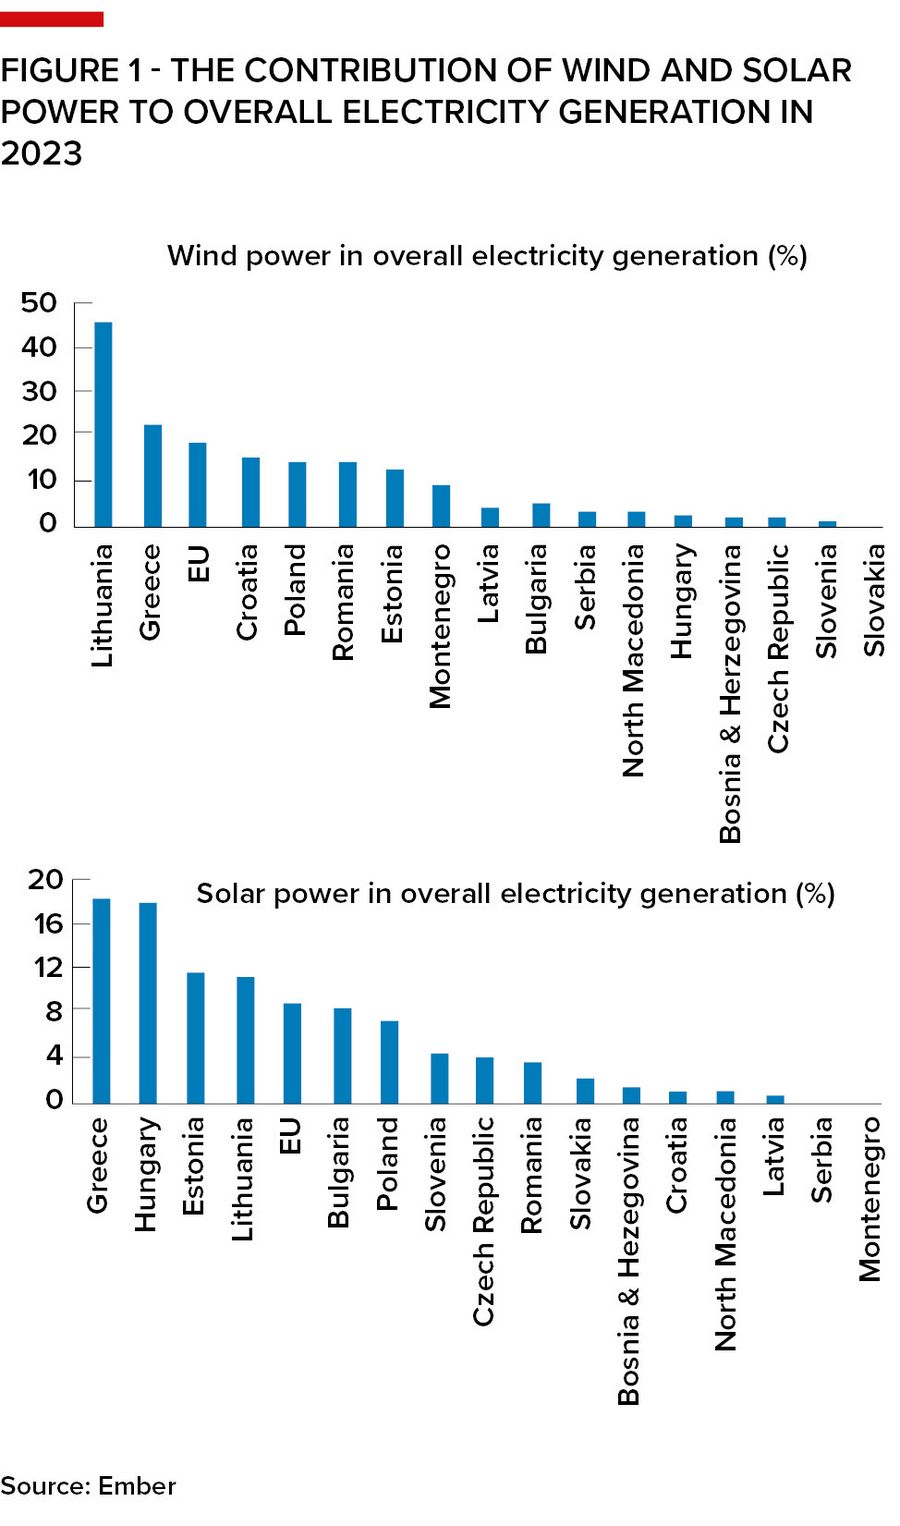 Figure 1 - The contribution of wind and solar power to overall electricity generation in 2023